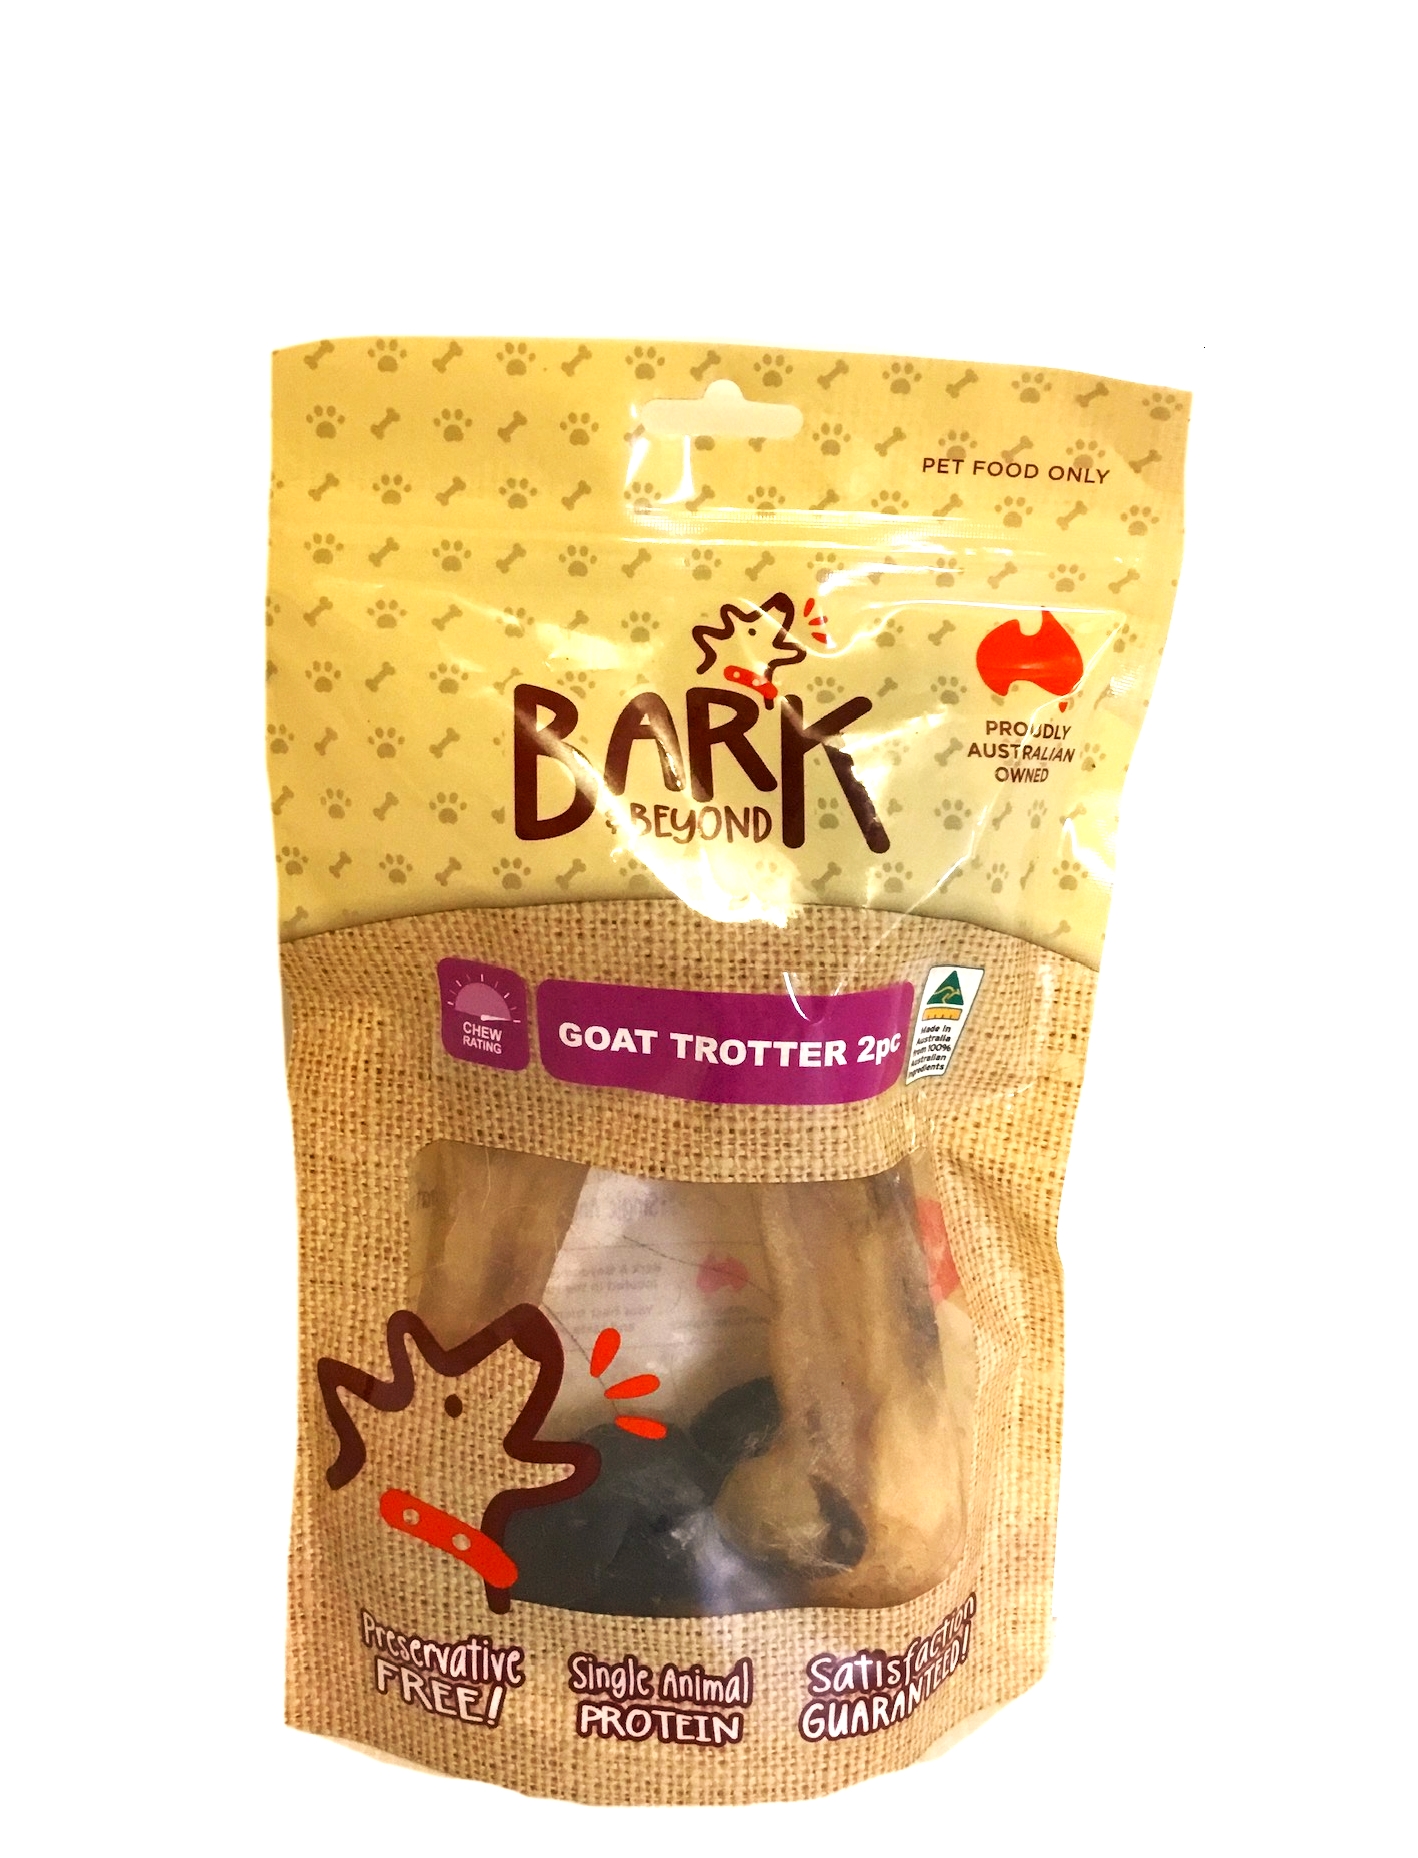 Goat Trotters 2pk - All Pets Pantry